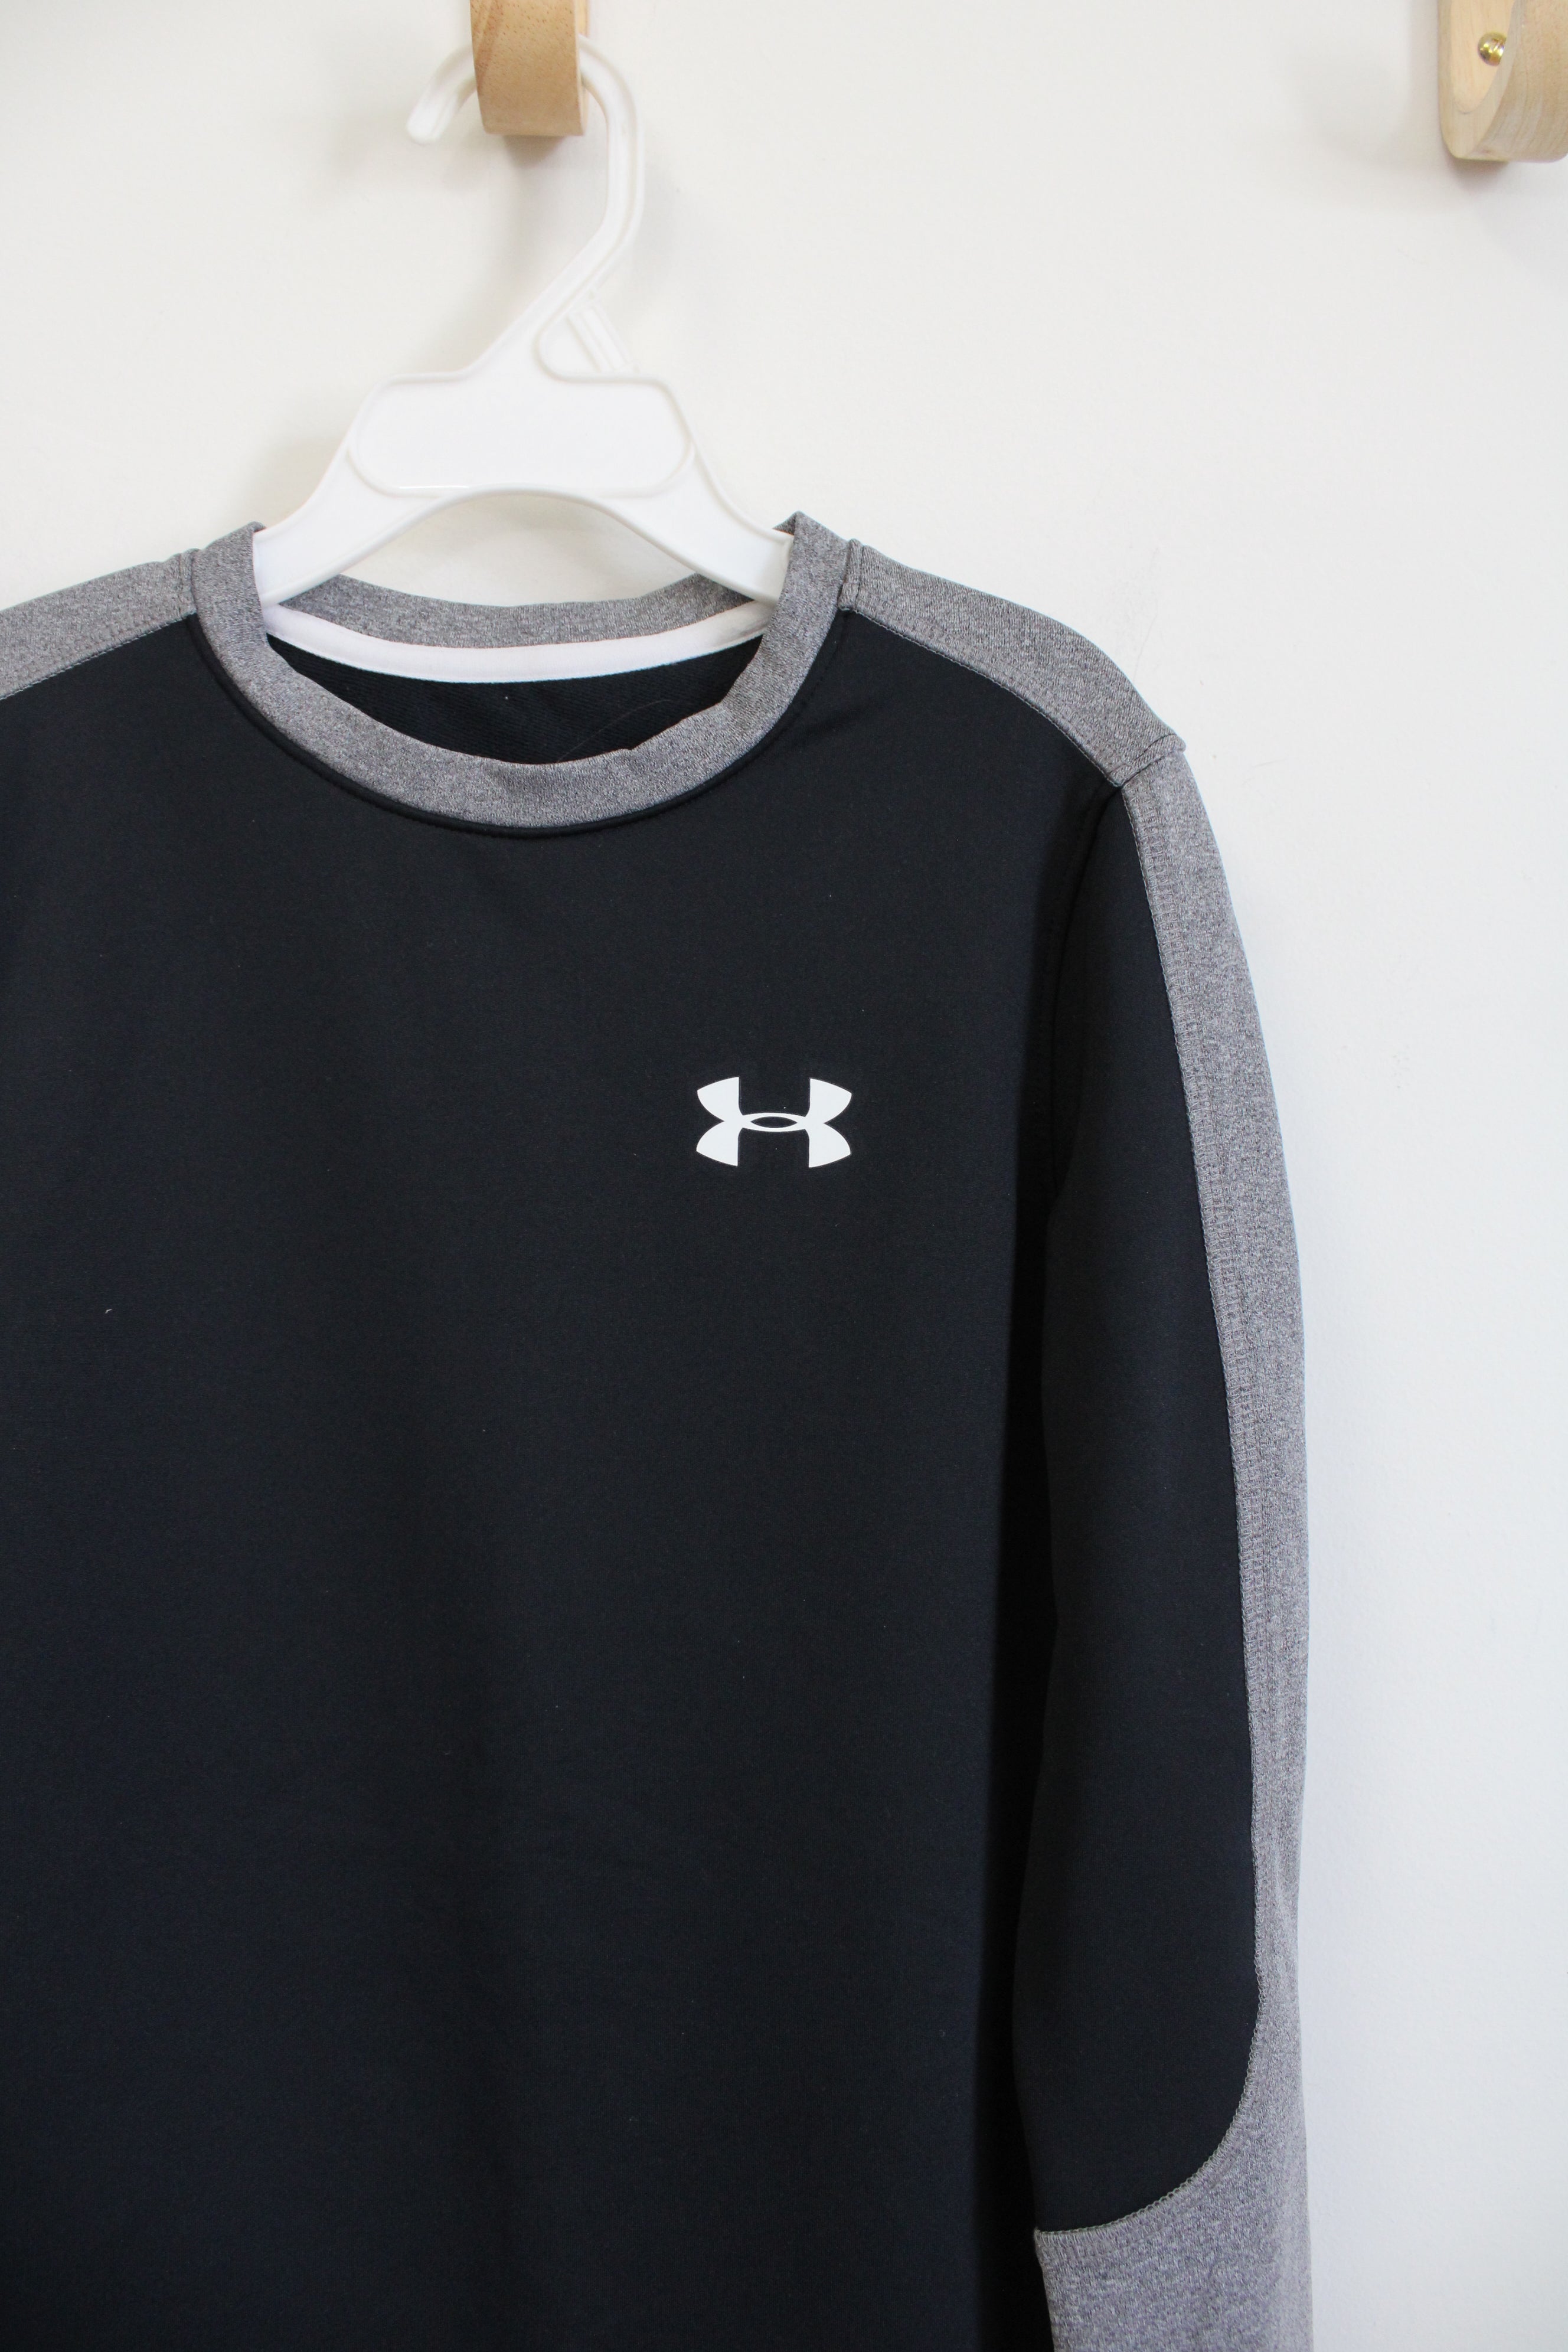 Under Armour Fitted ColdGear Thermal Black Gray Long Sleeved Shirt | Youth M (10/12)